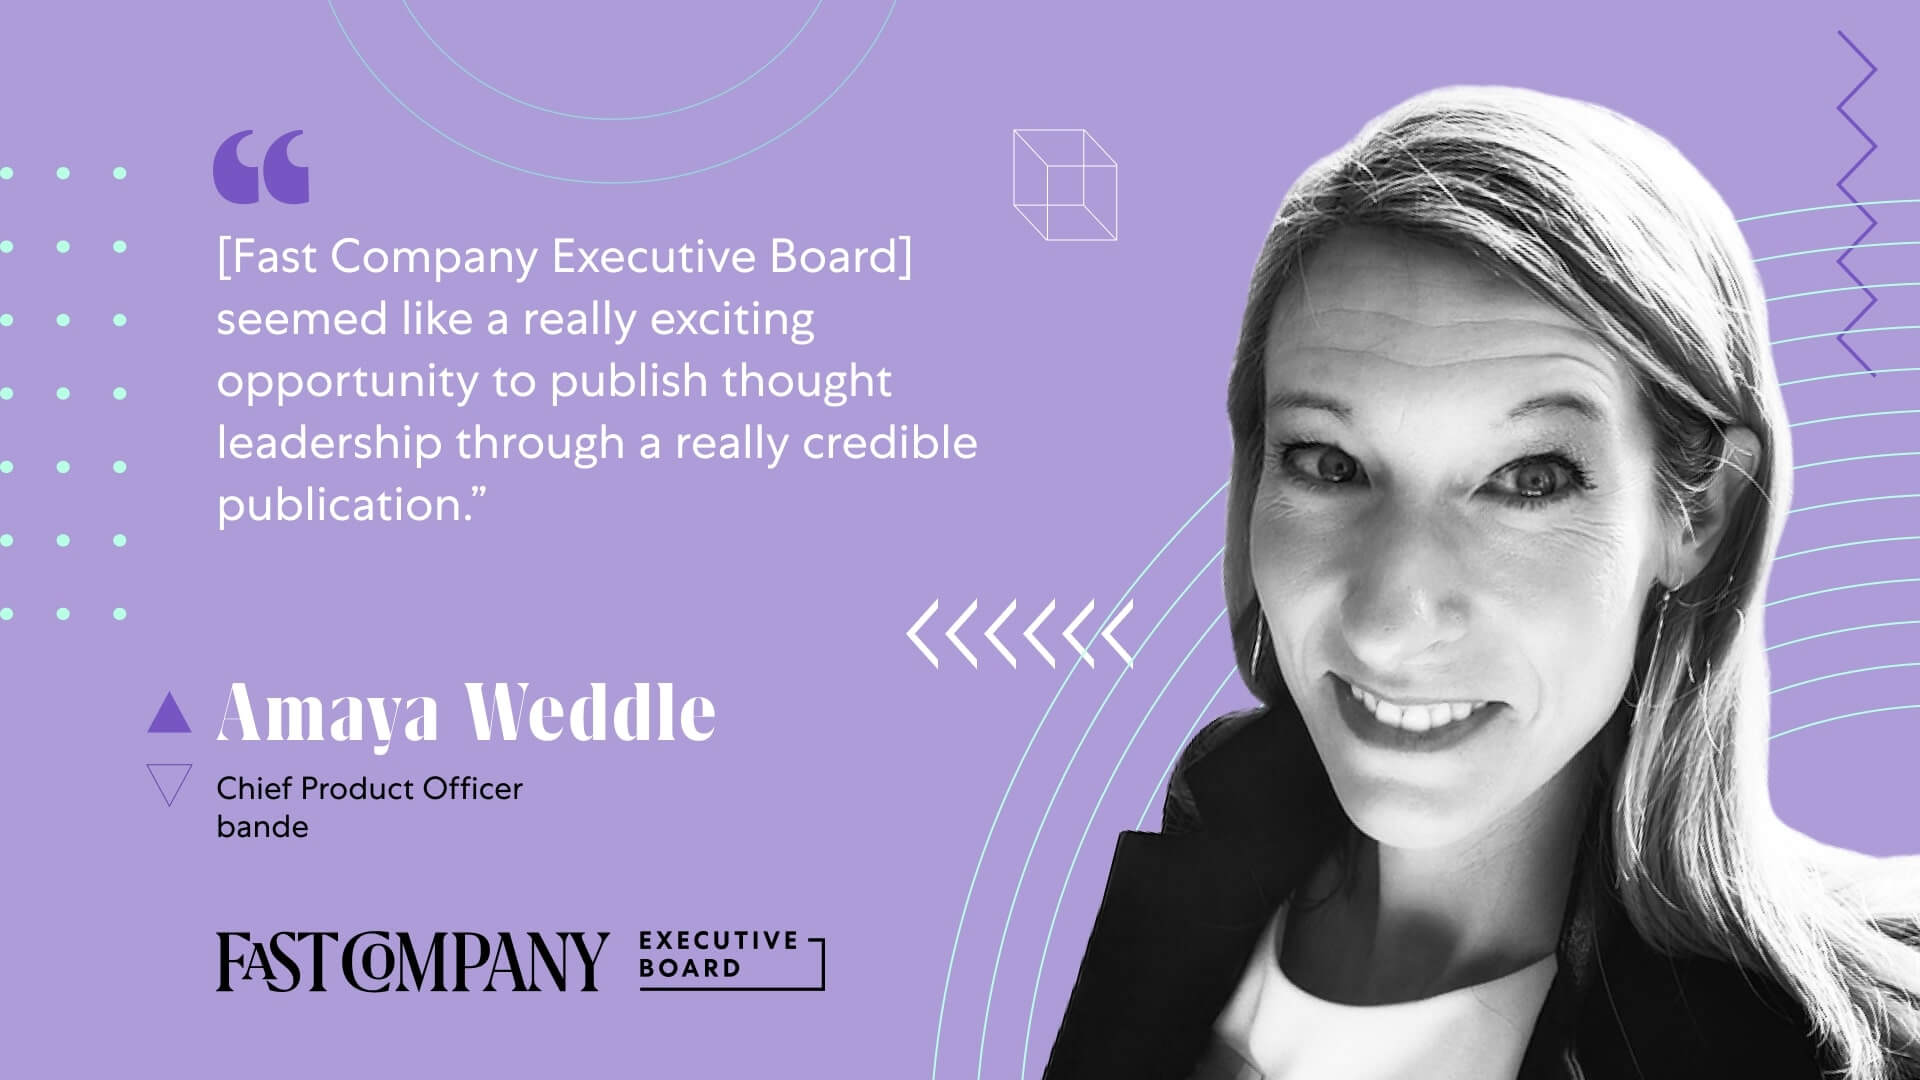 Fast Company Executive Board Provides Amaya Weddle With a Respected Thought Leadership Outlet